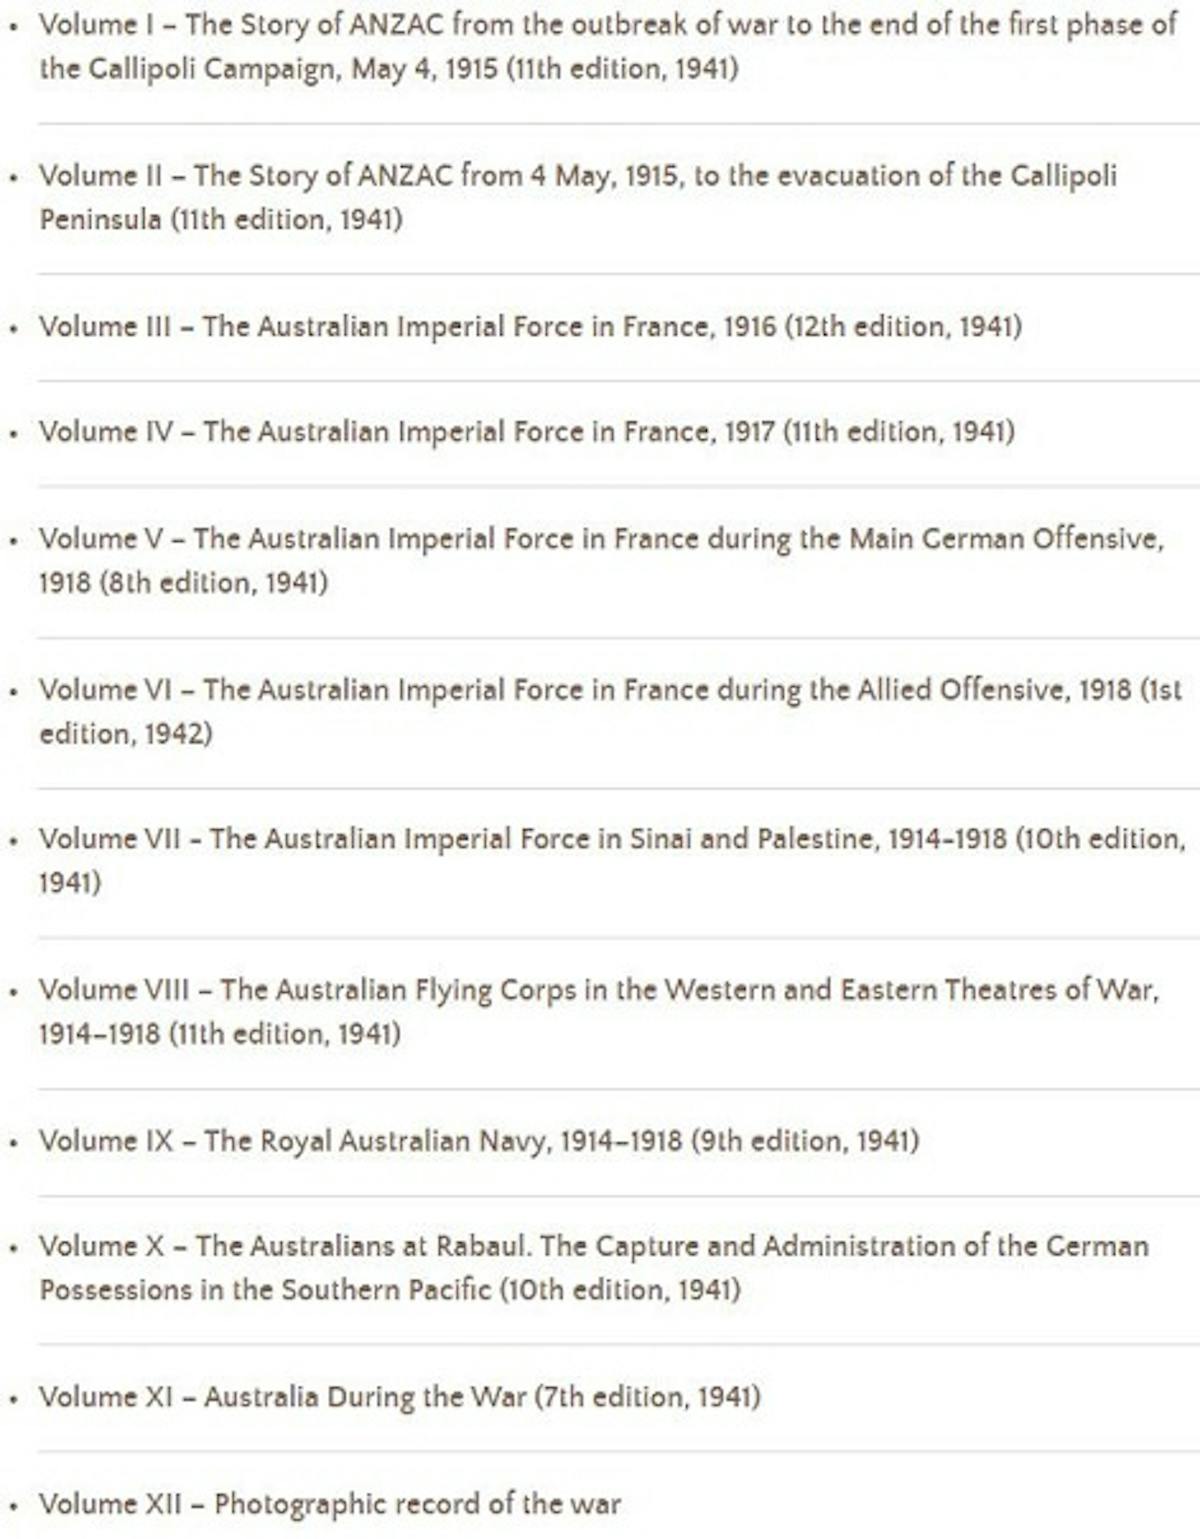 List of the 12 volumes in The Official History of Australia in the Great War of 1914-1918